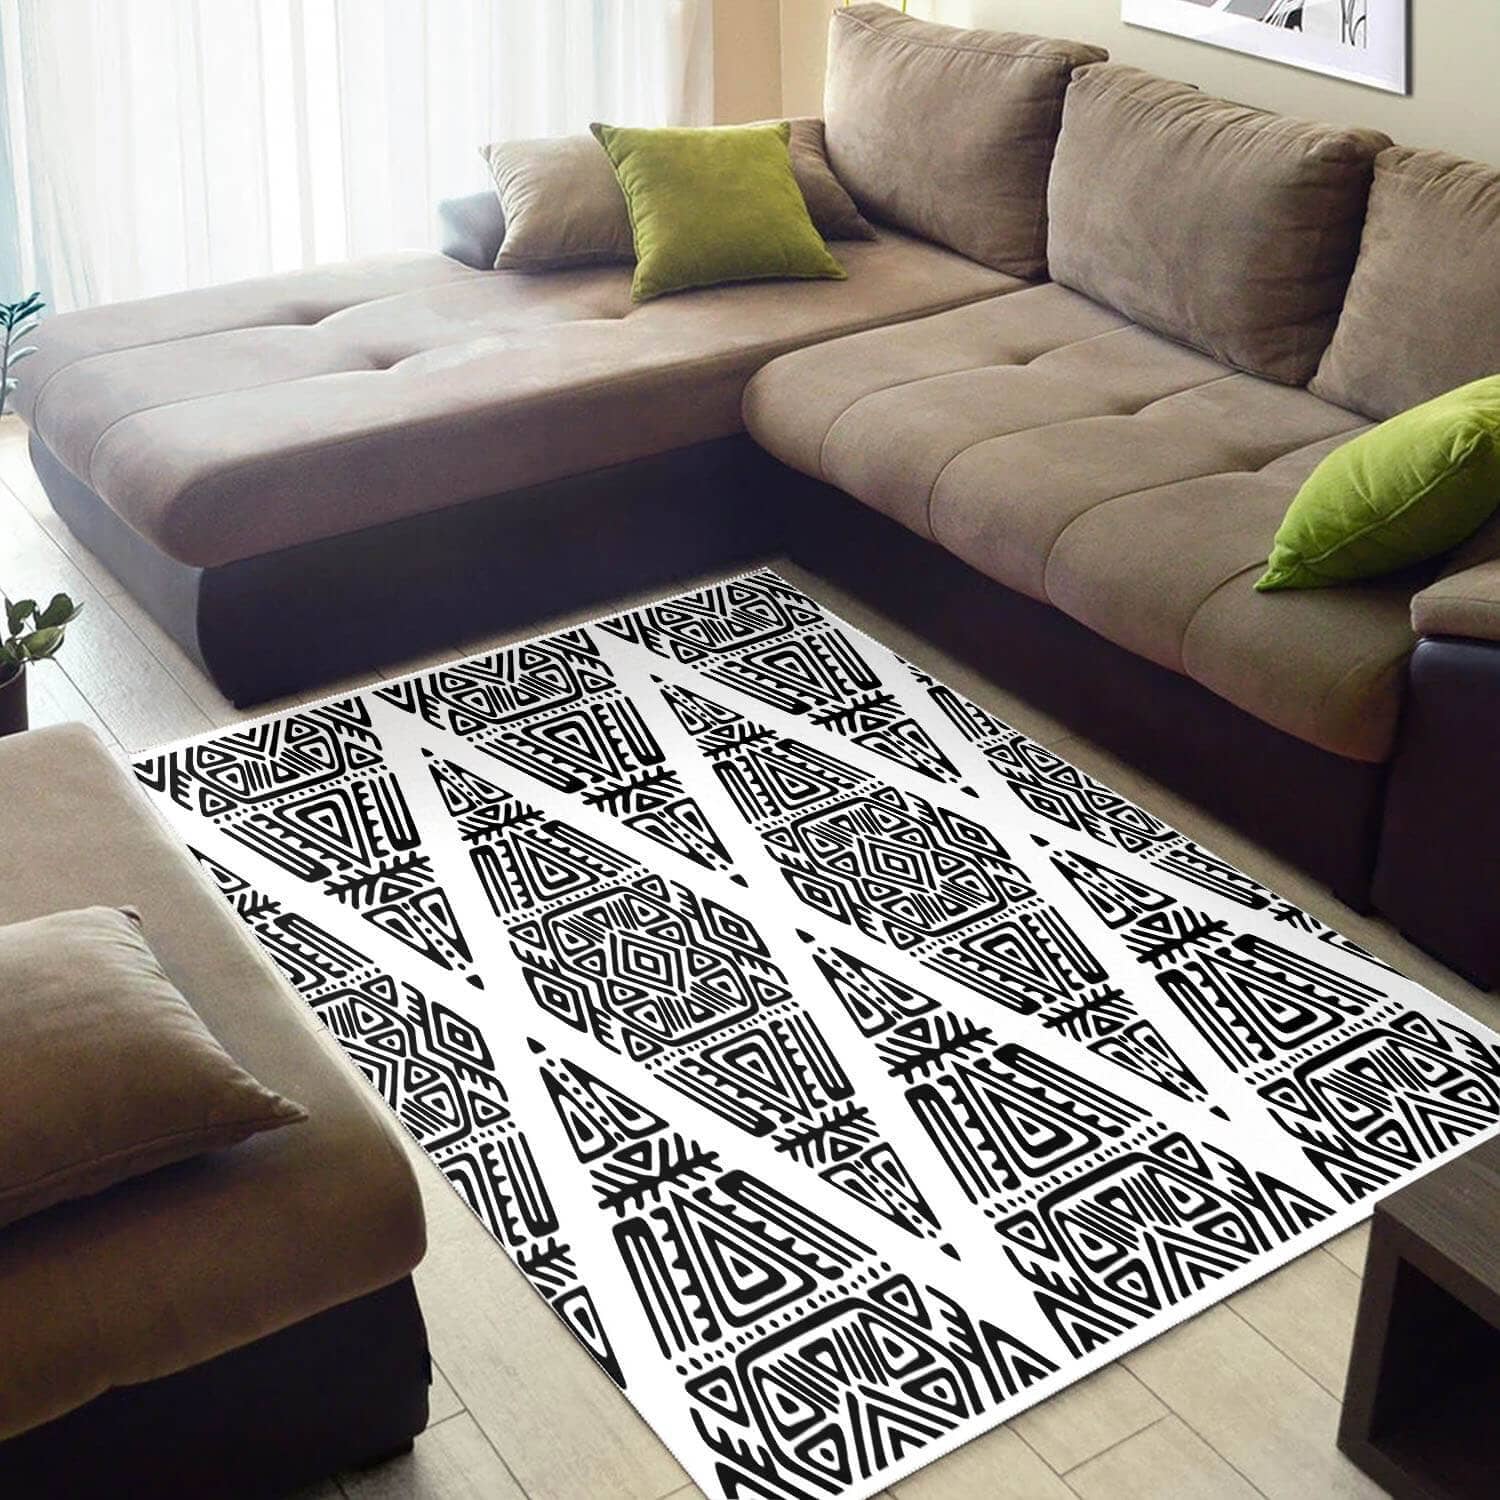 Trendy African Attractive Afro American Afrocentric Art Large Carpet Living Room Rug